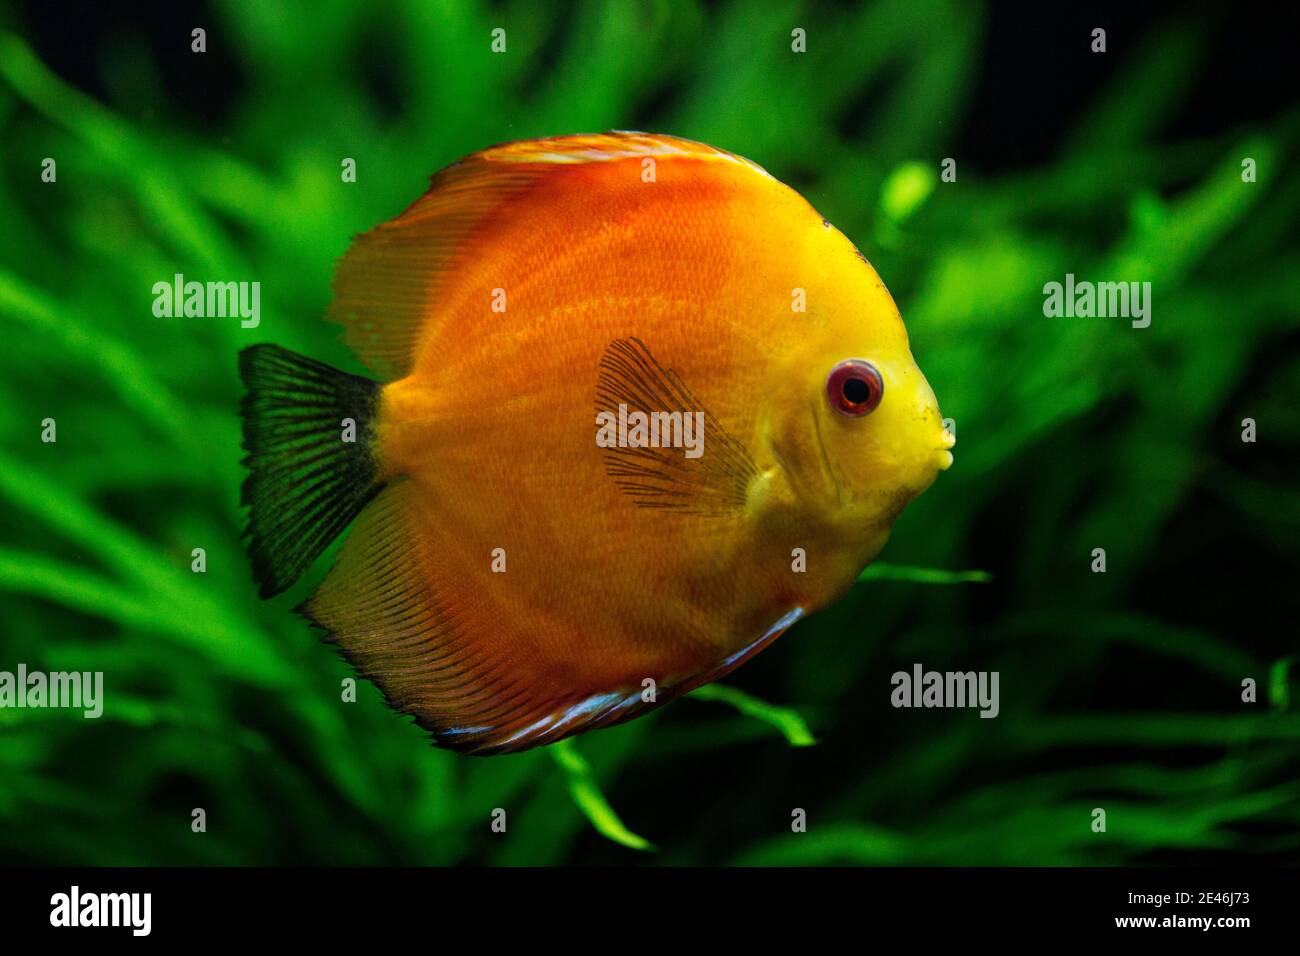 A red discus fish (Symphysodon discus), also known as Heckel discus, is a cichlid native to the Amazon Basin in South America. Stock Photo